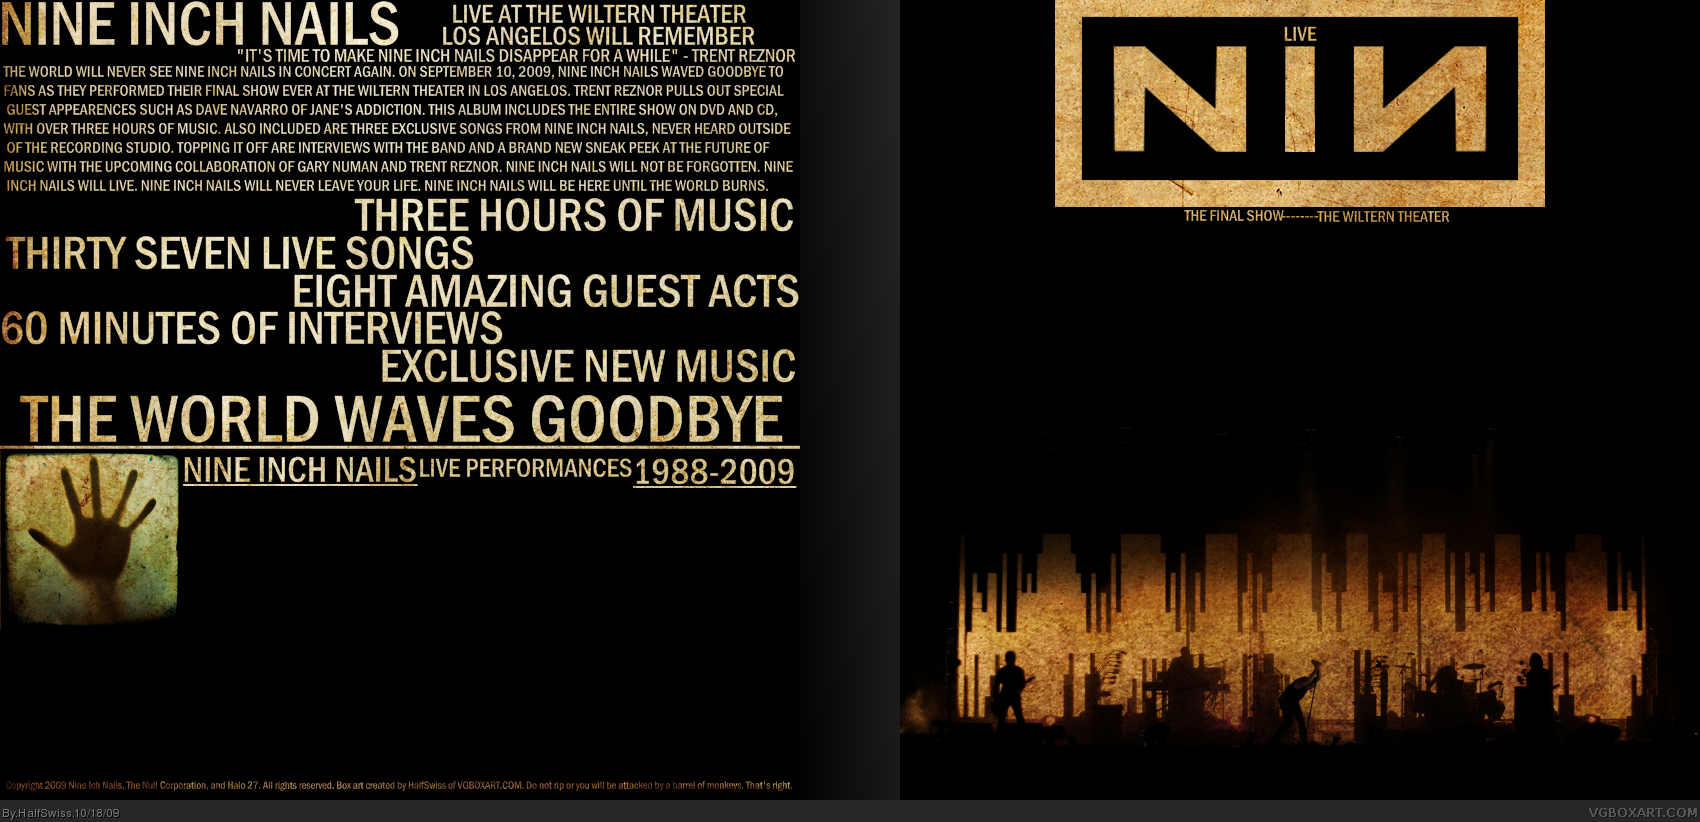 Nine Inch Nails: The Final Show box cover